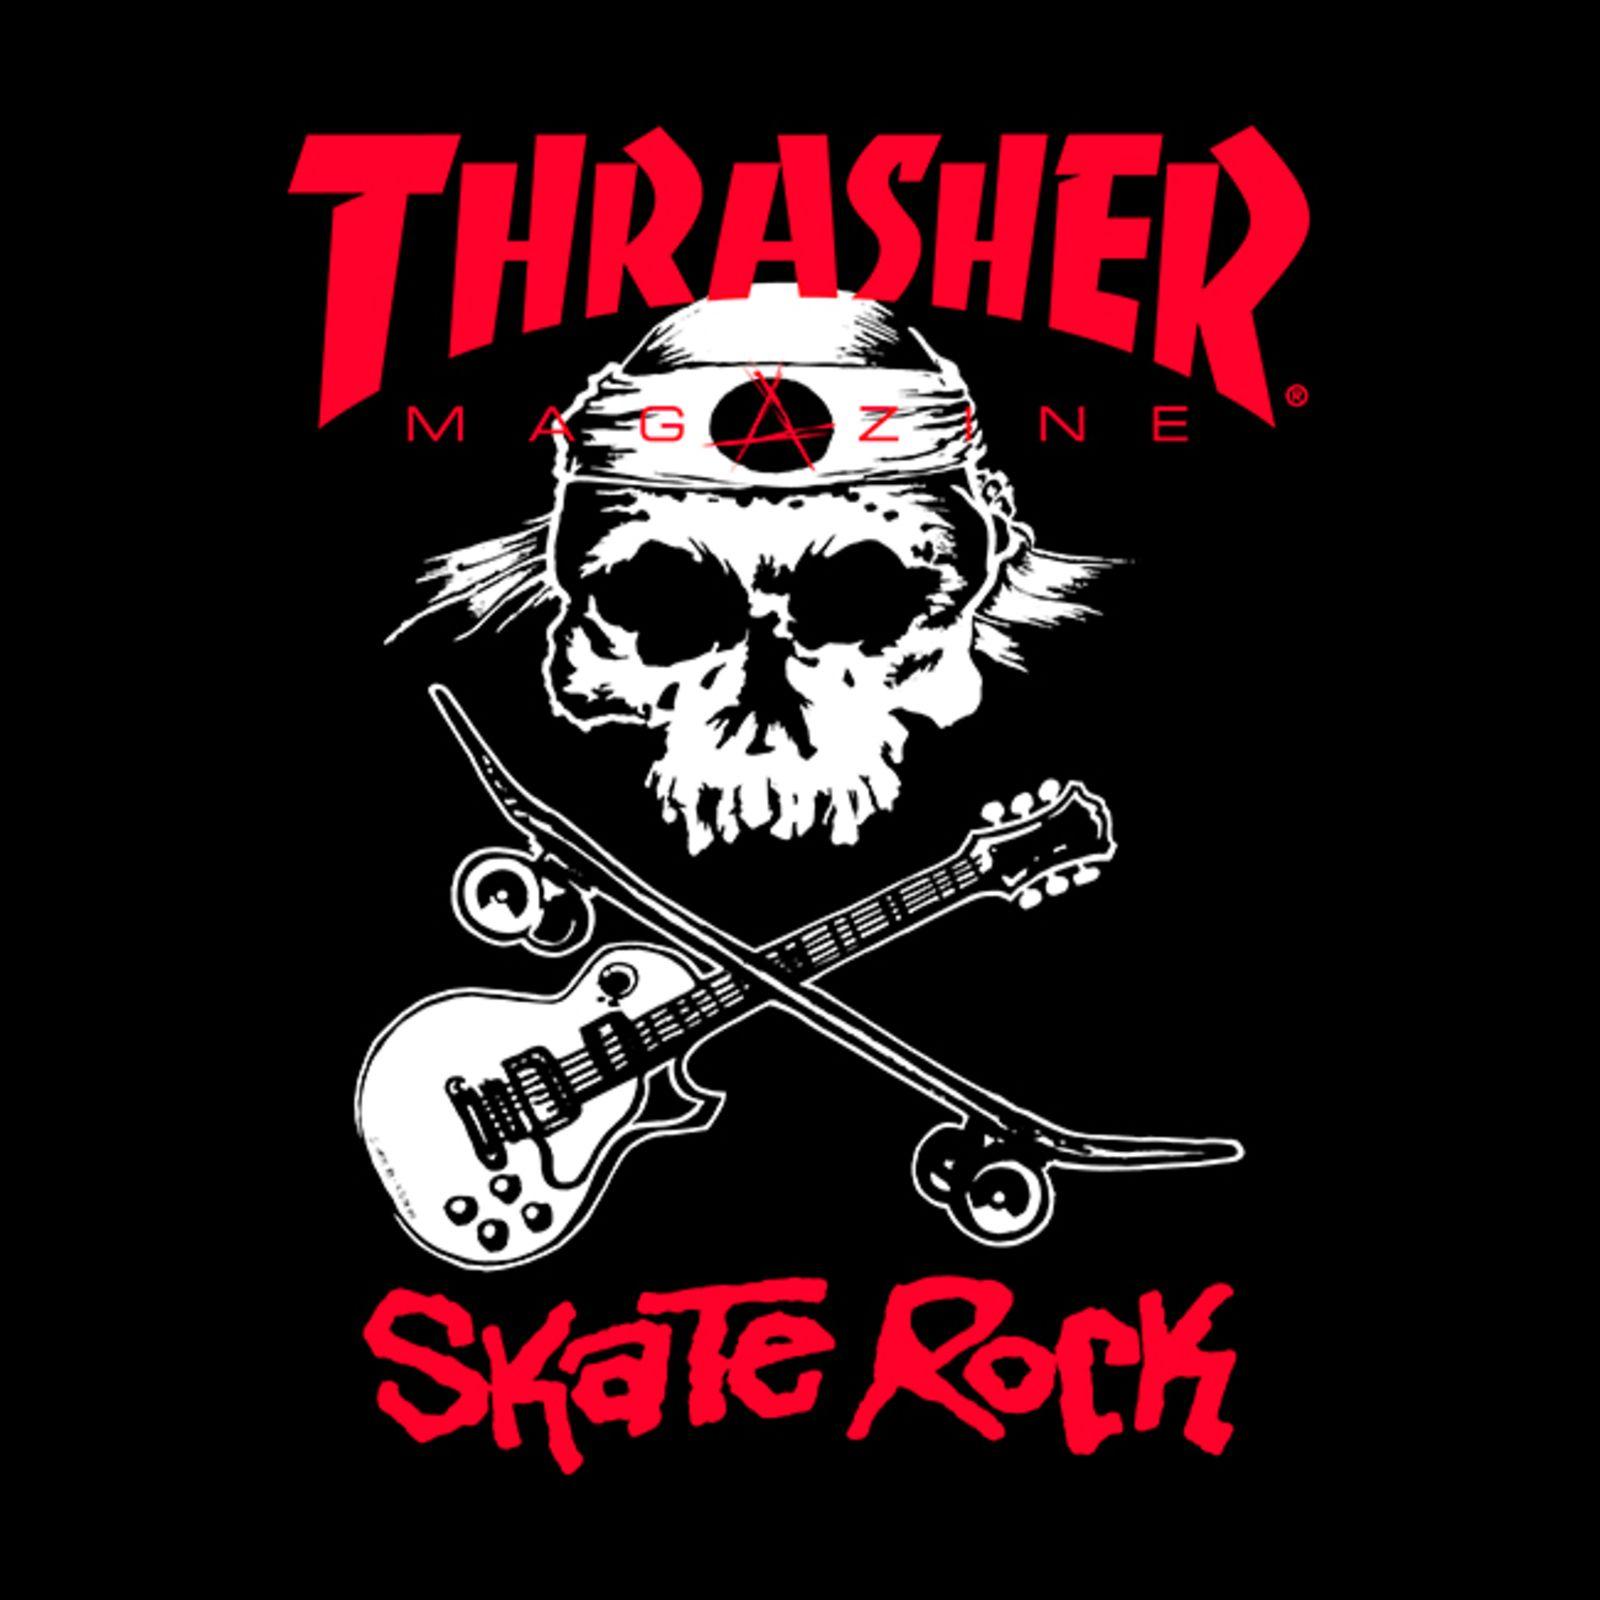 Thrasher Satanic Logo - Perhaps Thrasher's most controversial logo. This one reflects